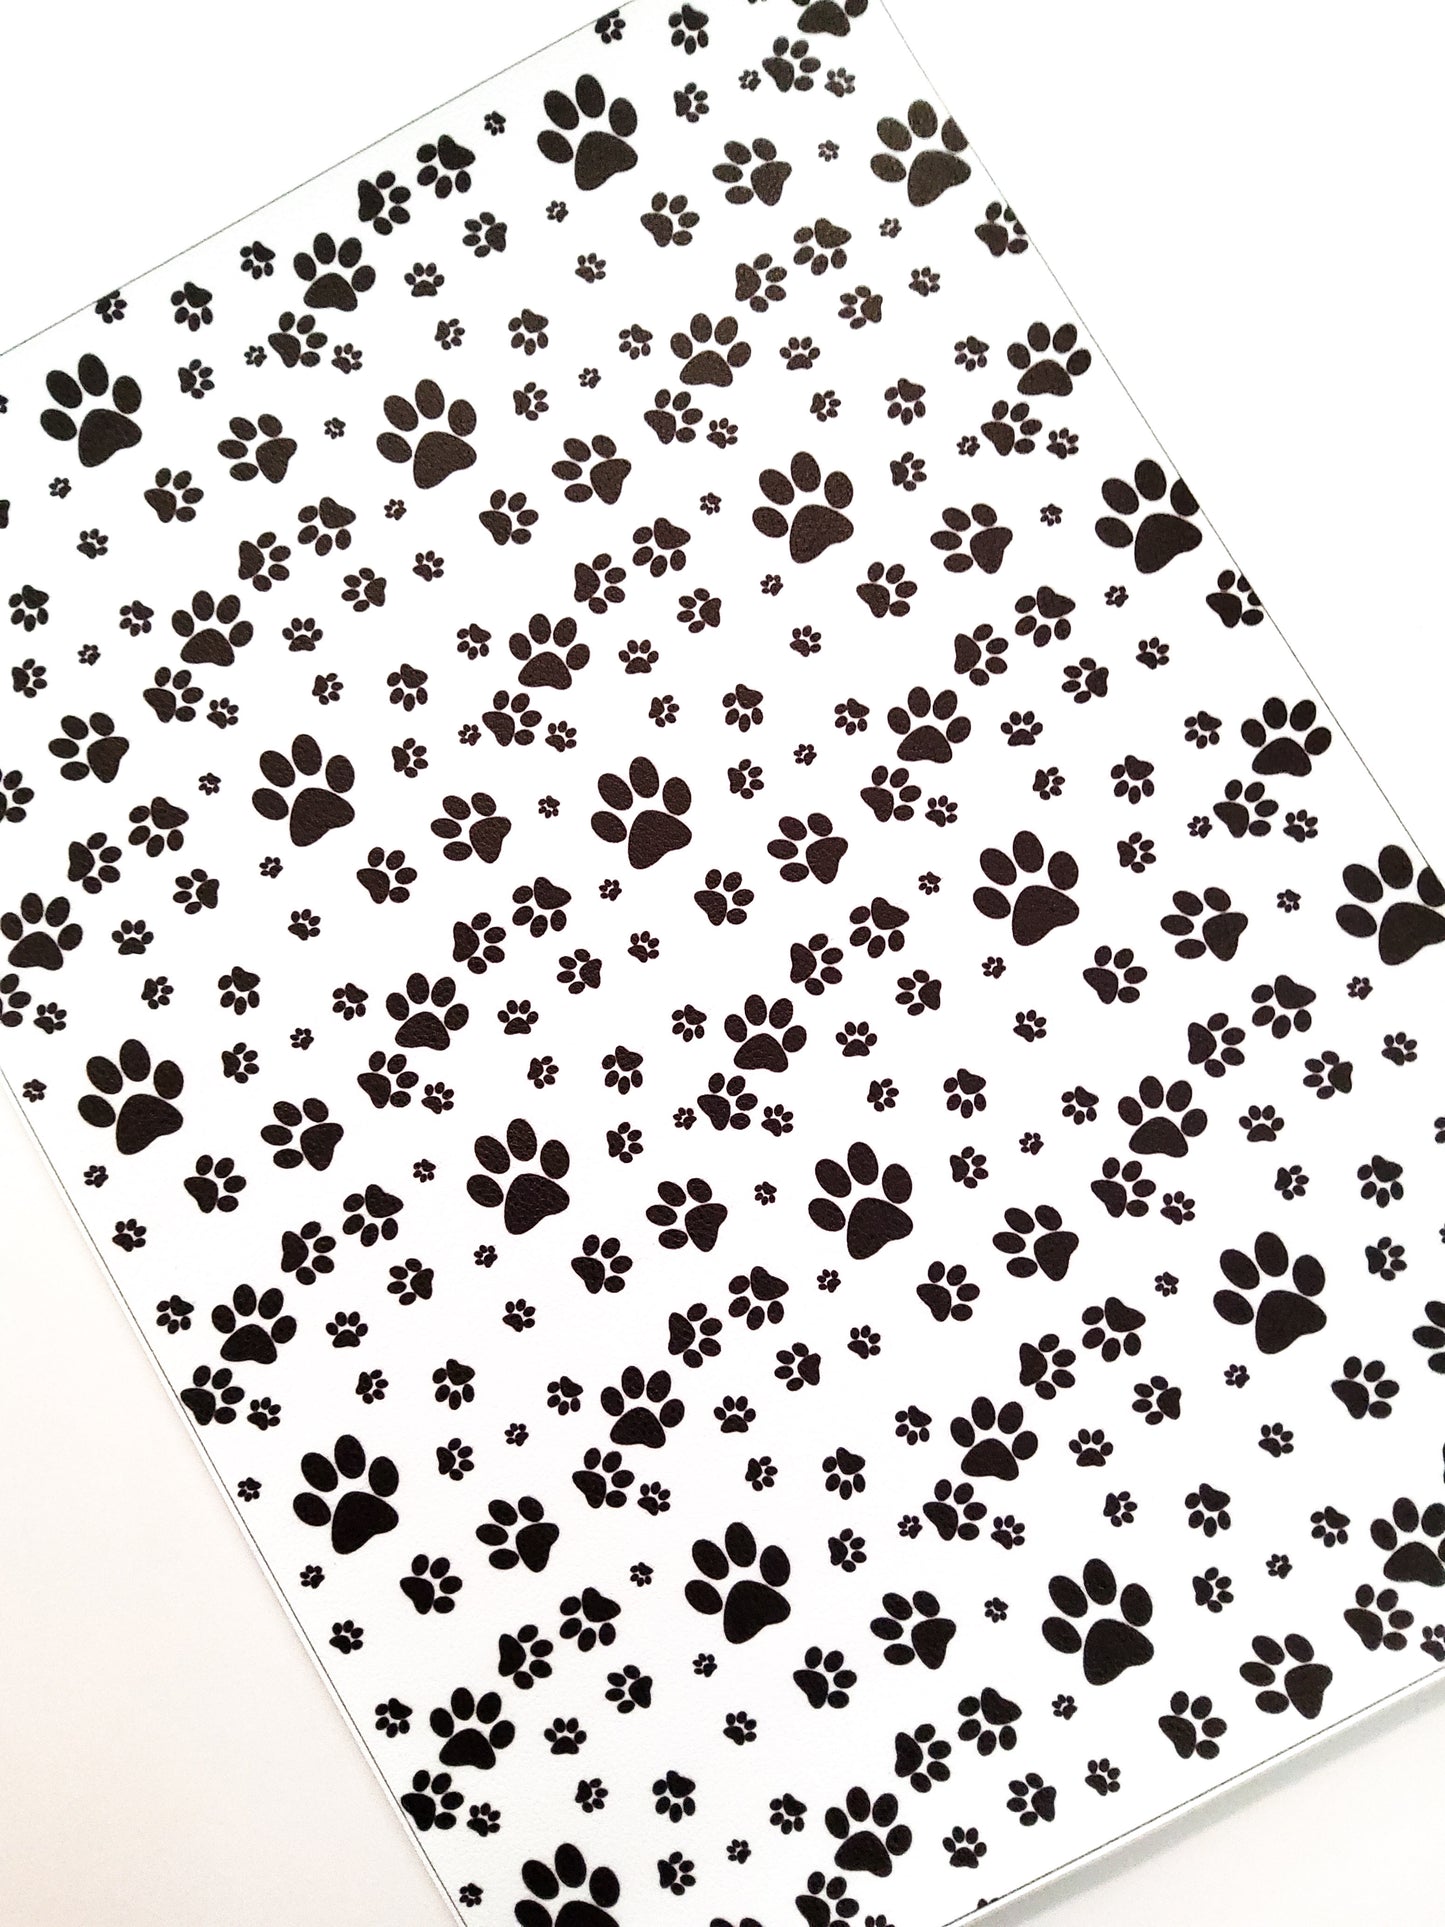 Black and White Paw Print 9x12 faux leather sheet